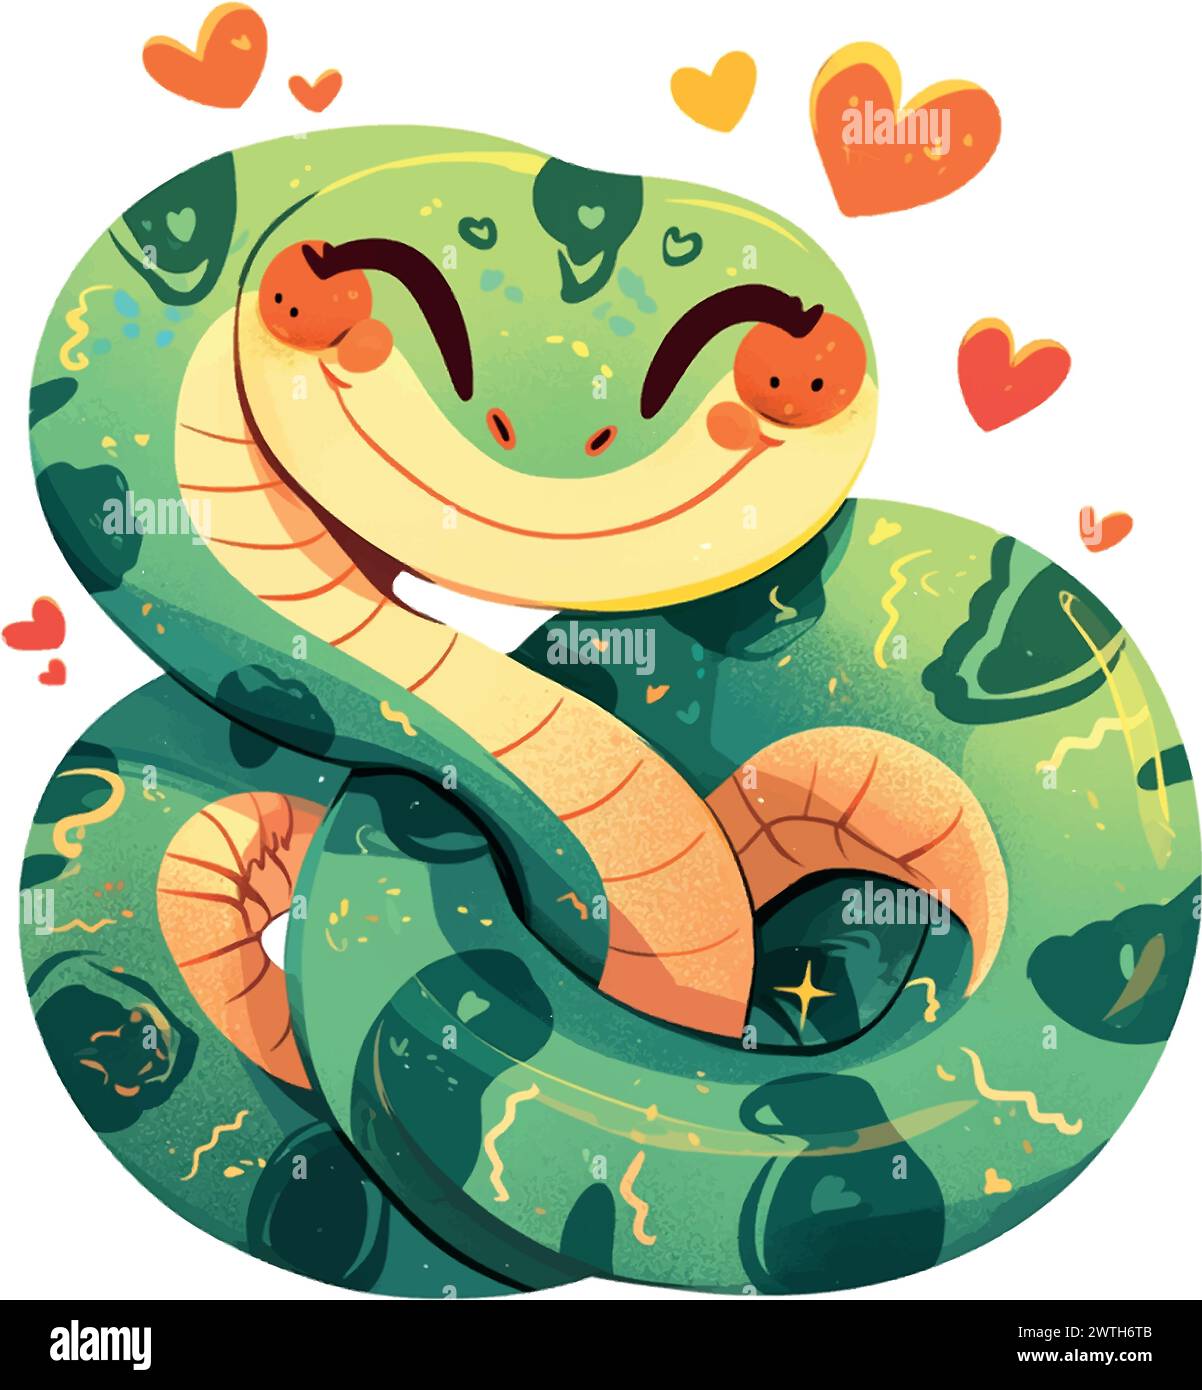 A green snake with a heart on its head and a heart on its tail. The snake is smiling and surrounded by hearts Stock Vector